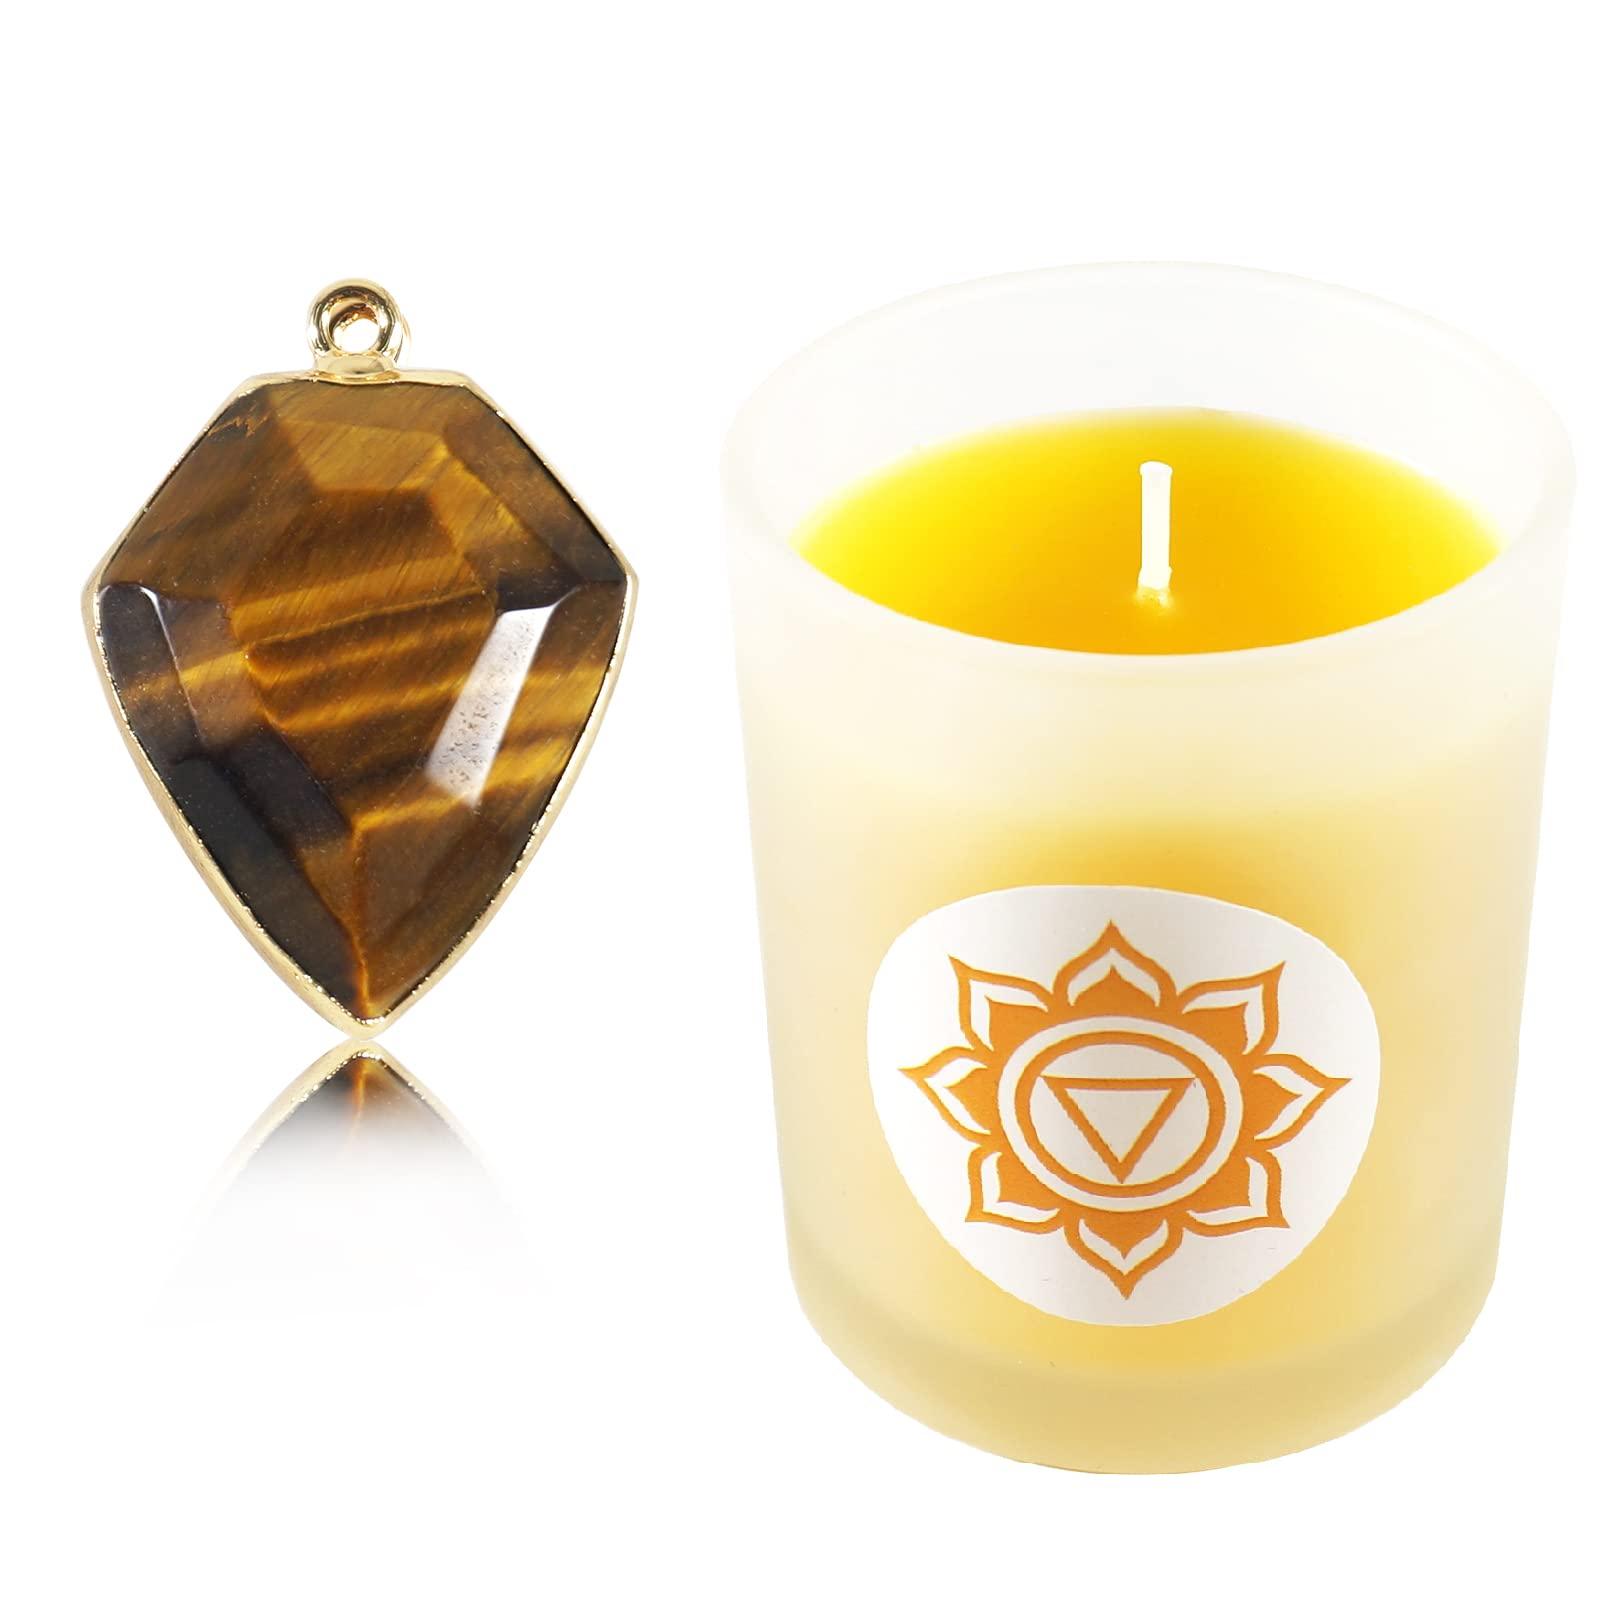 Soulnioi Lemon Yellow Scented Candles Set of Fragrance Soy Wax,Tiger Eye Crystal Diamond Shape Crystal Pendant of Stress Relief Relaxation for Gift - Lemon/100g